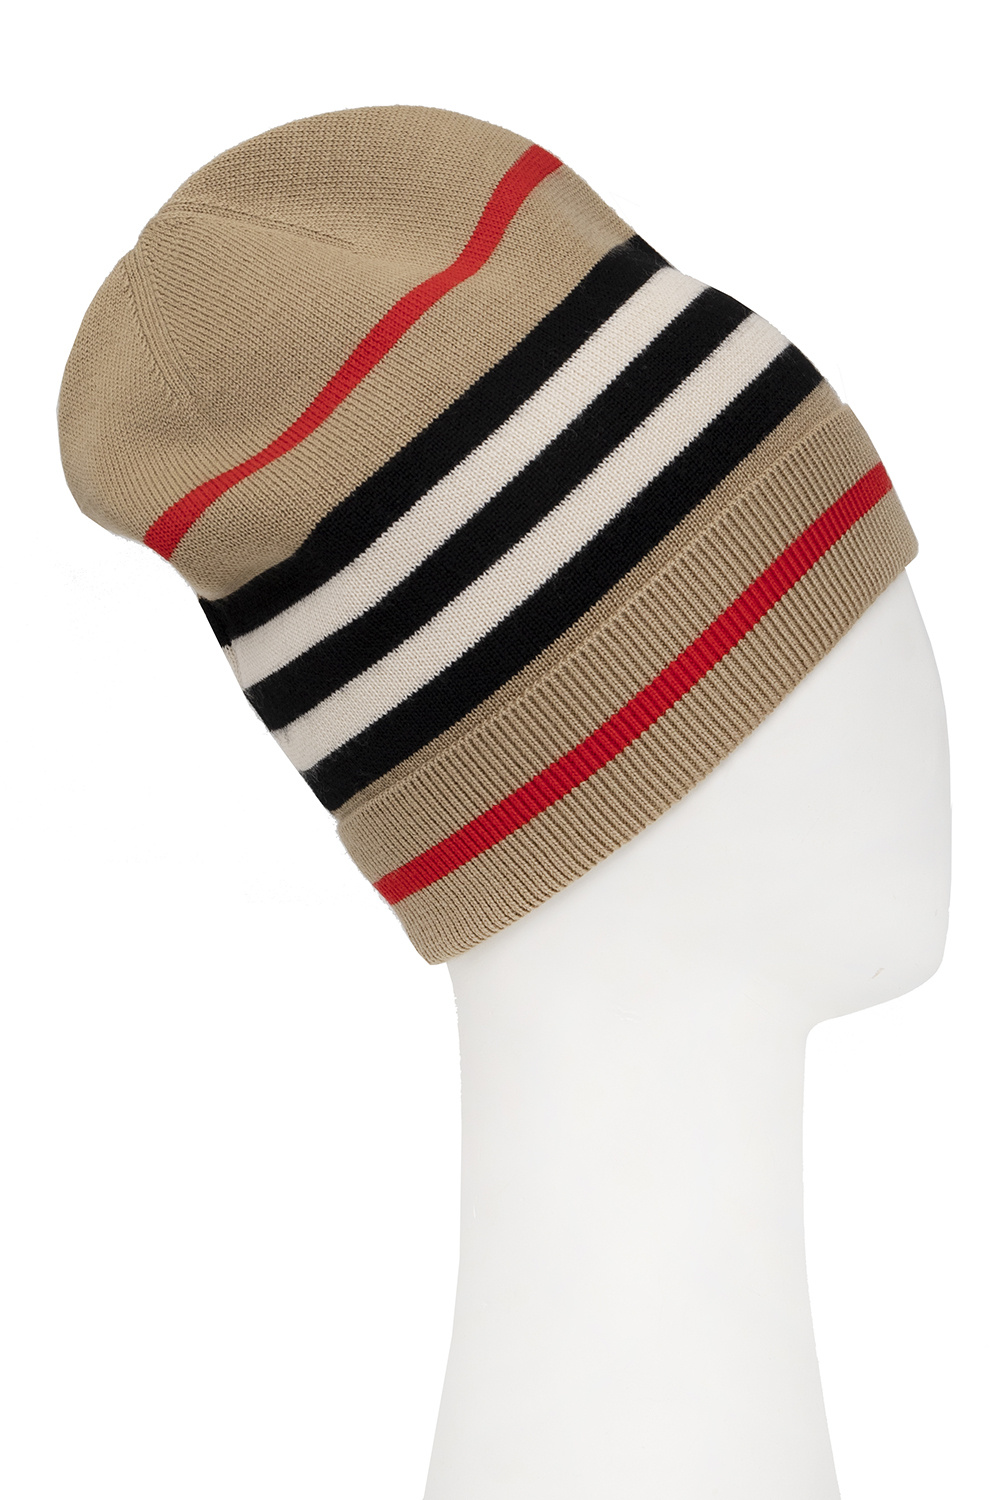 burberry logo-embroidered Kids ‘Daphine’ wool beanie